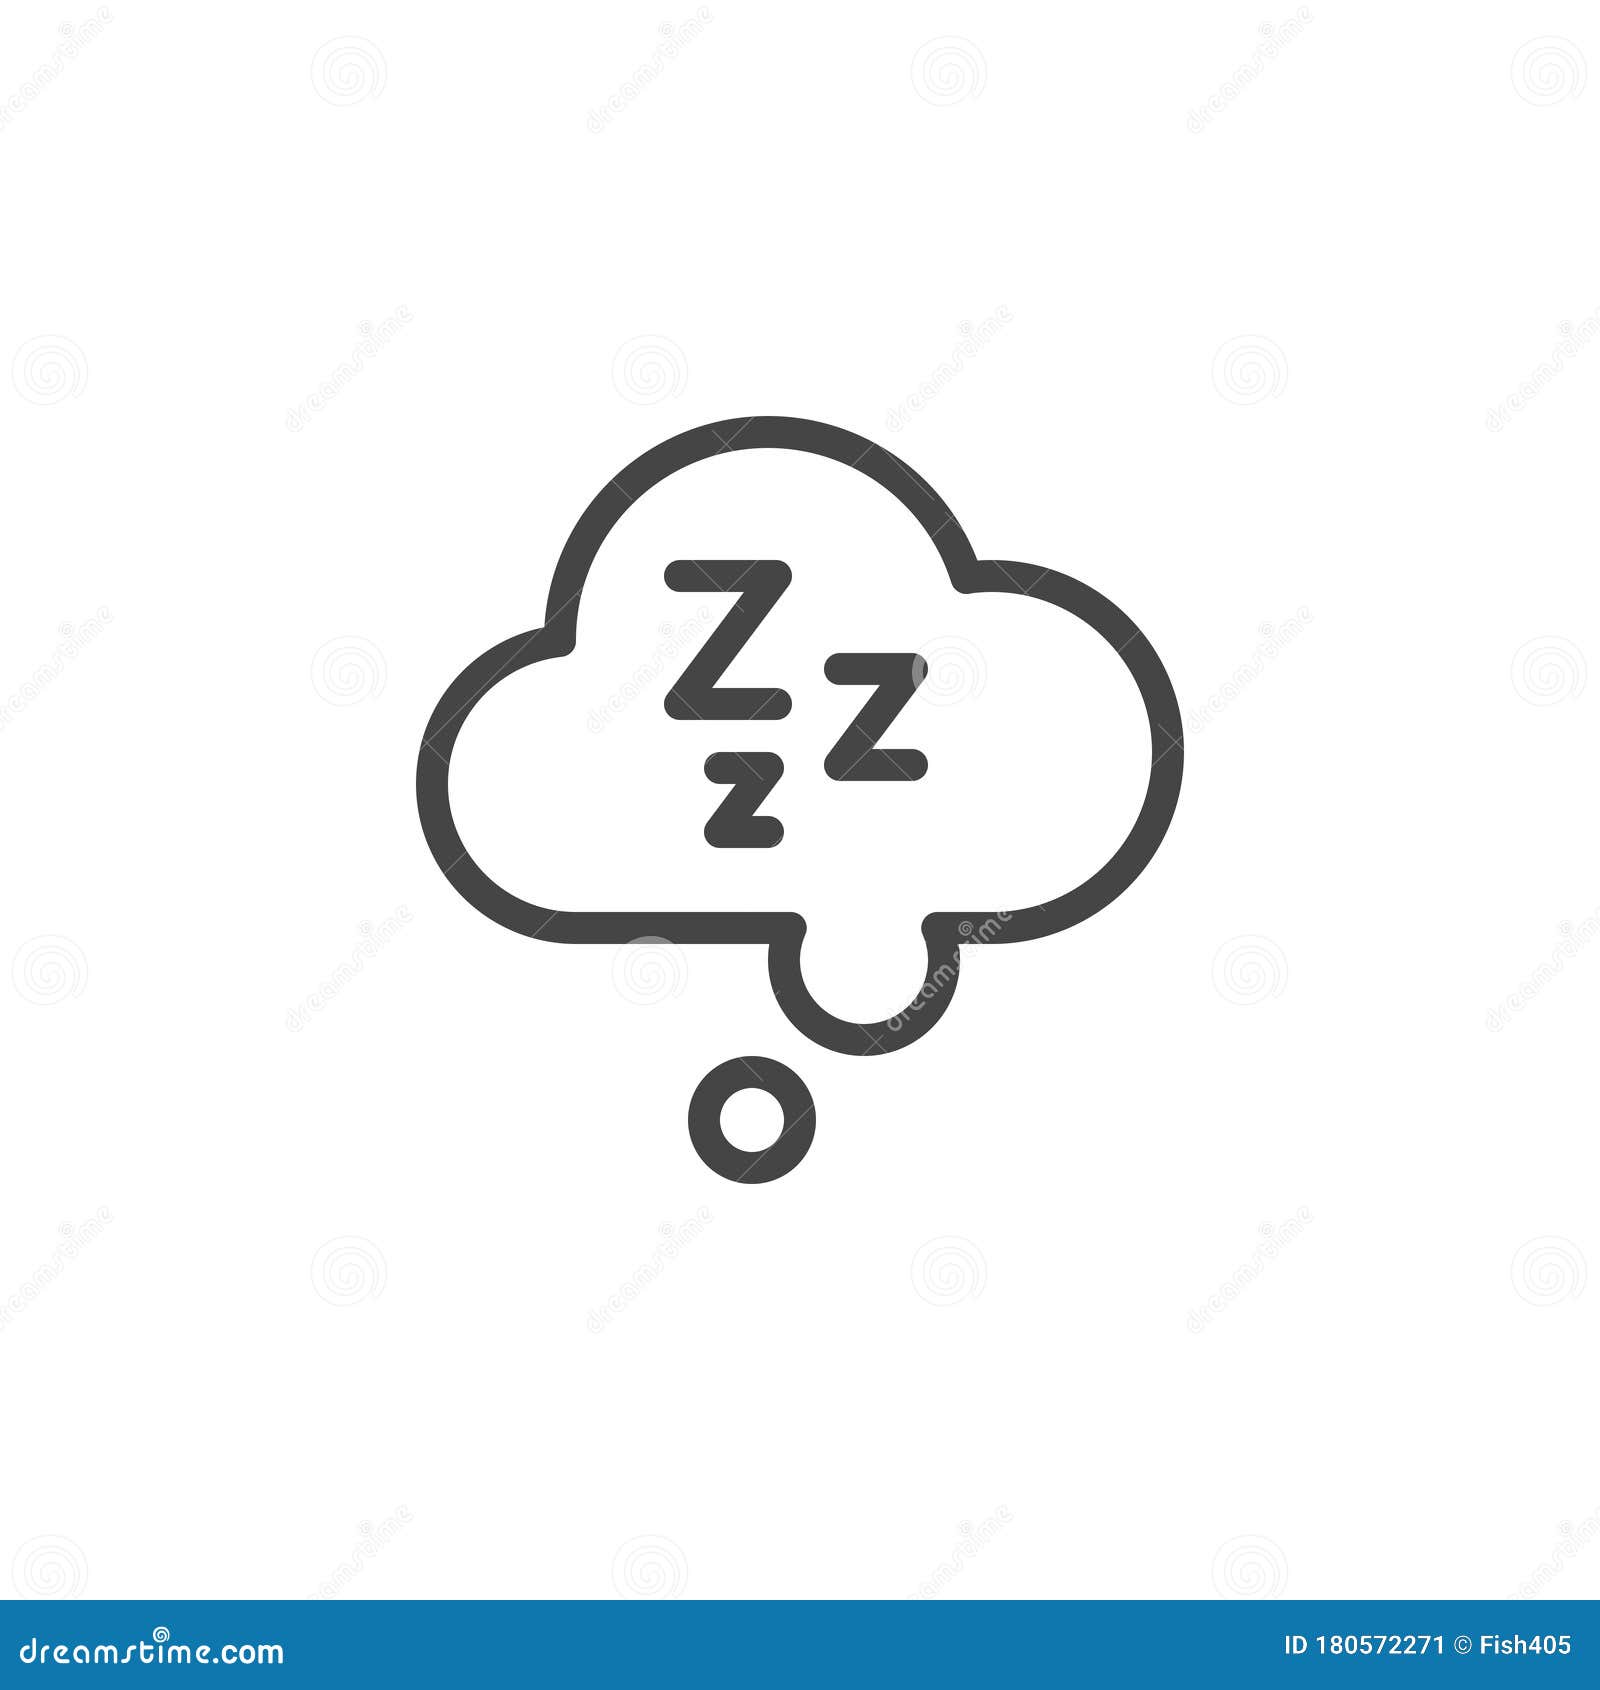 Sleepiness Graphic Icon. Drowsiness is a Symptom of Fatigue, Depression ...